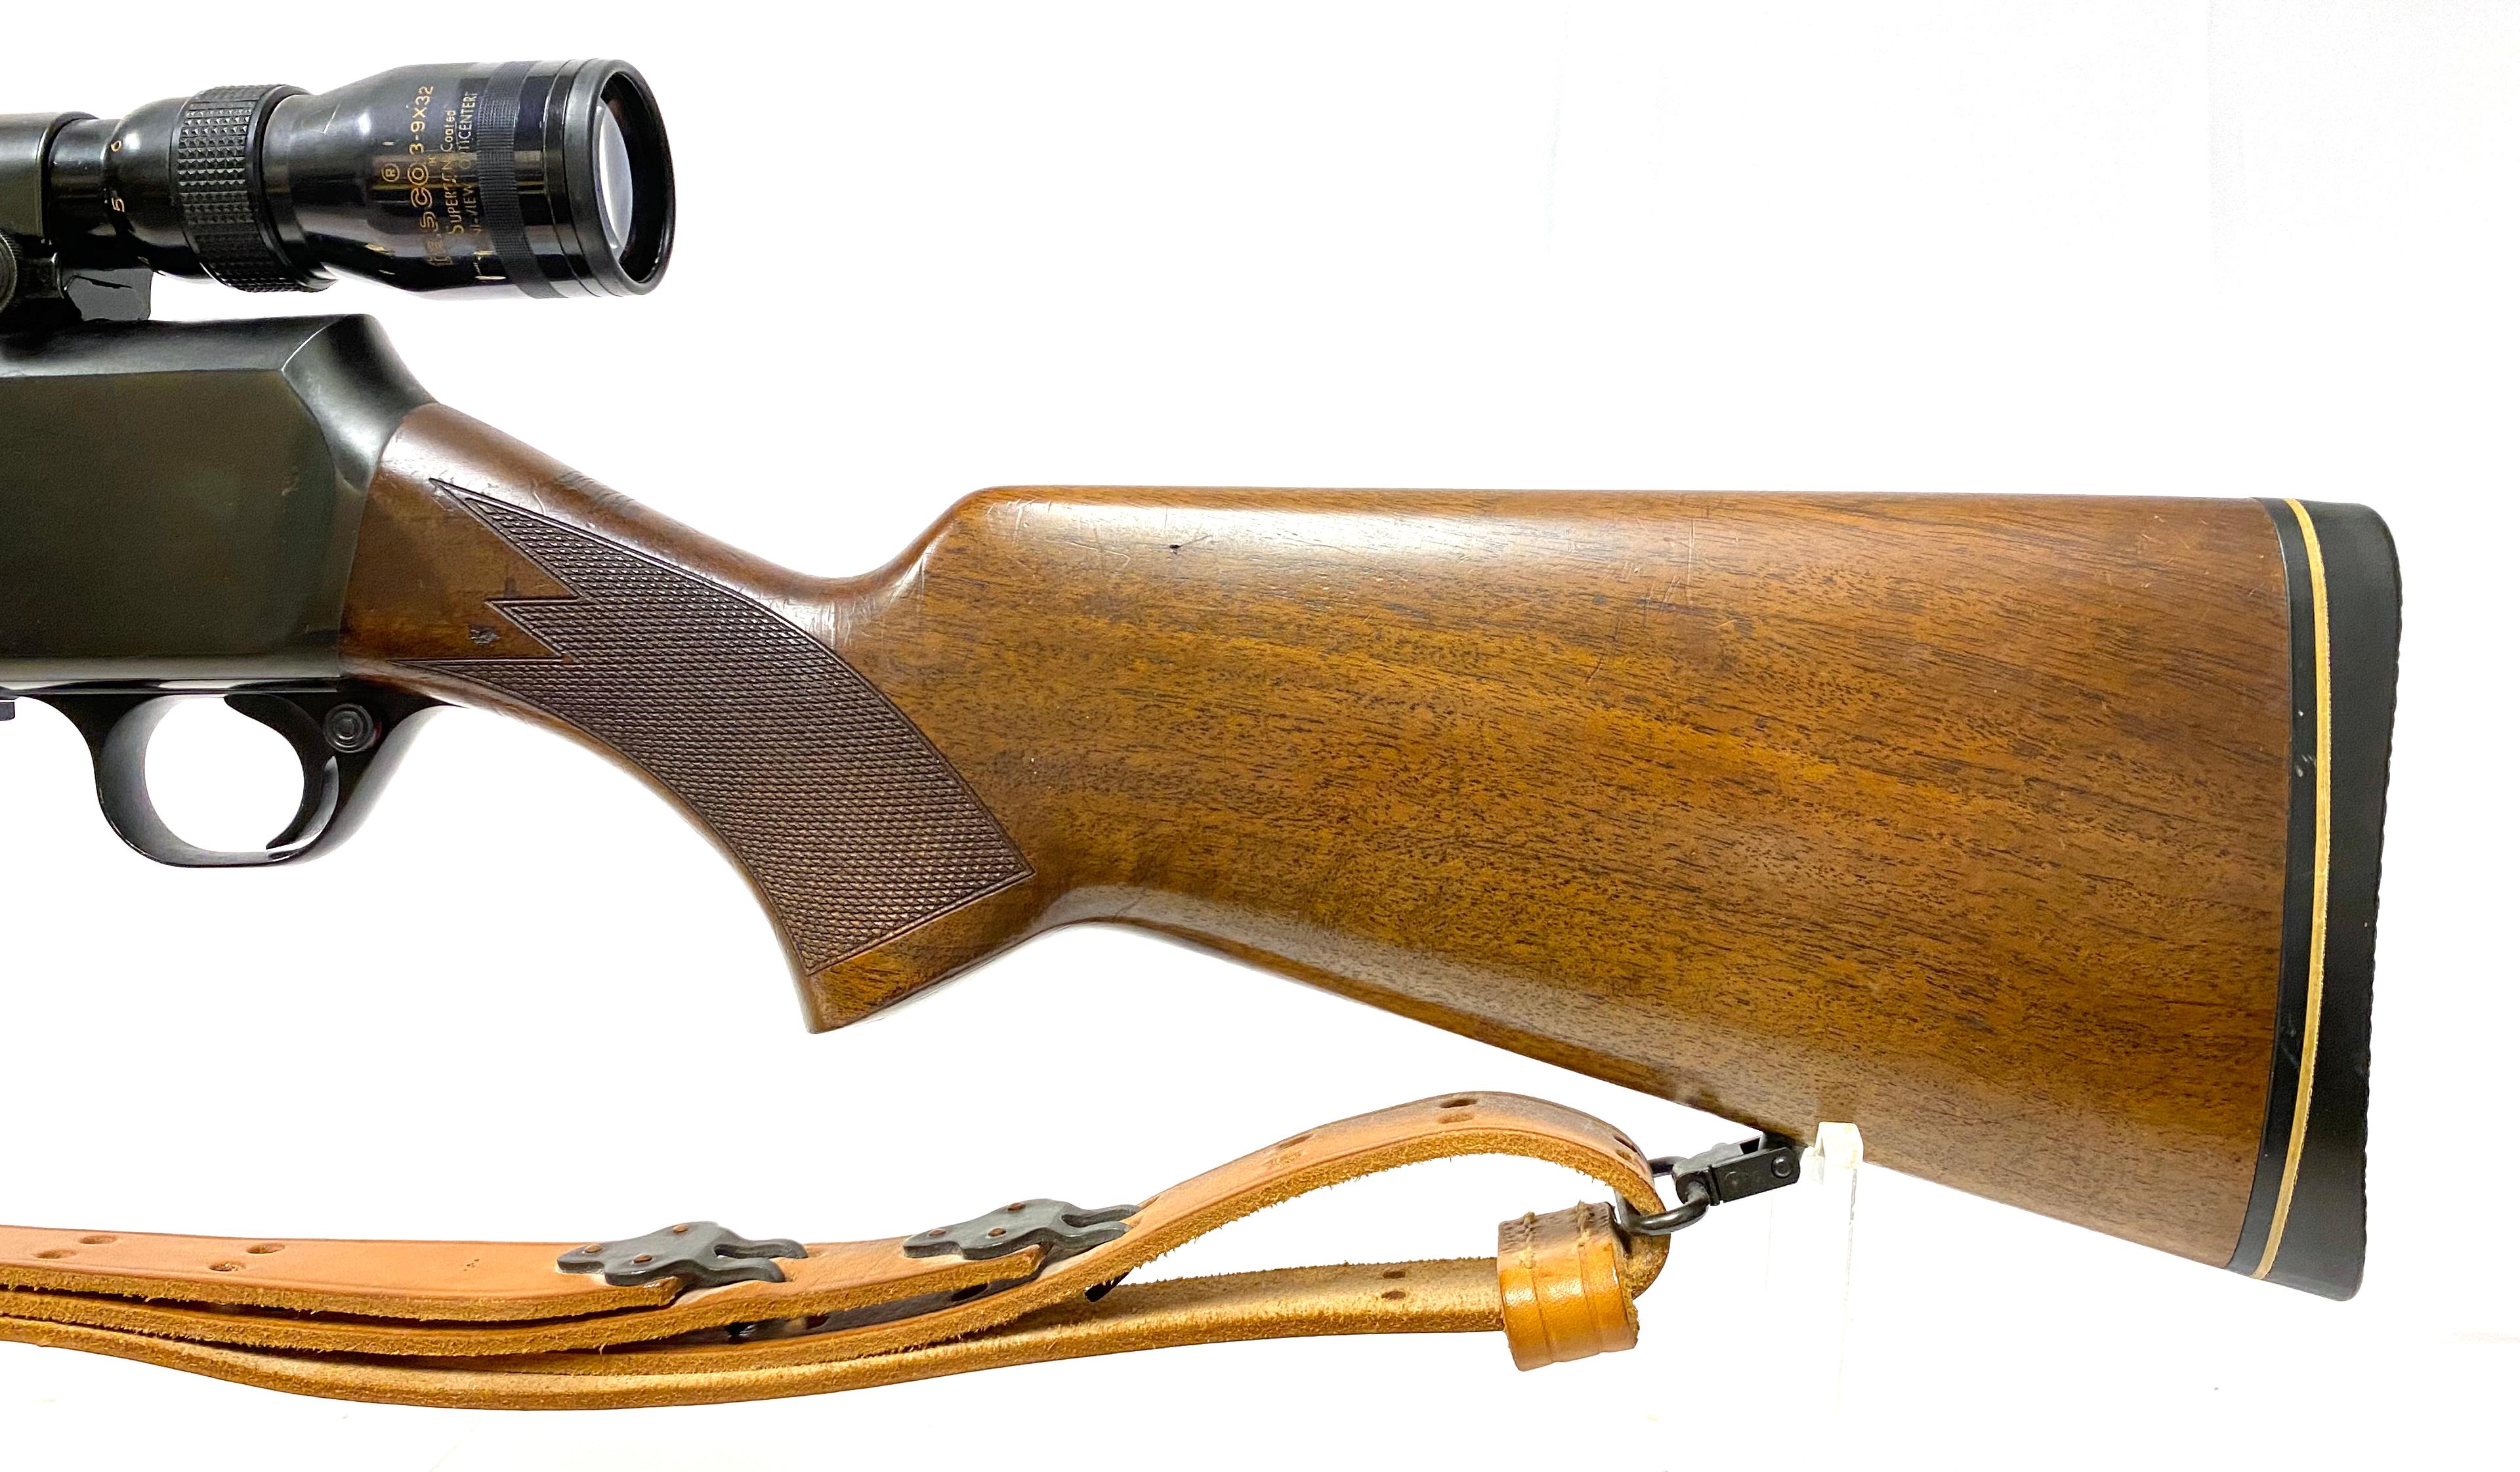 Excellent Belgium Browning BAR 7mm REM. MAG. Semi-Automatic Magazine Rifle